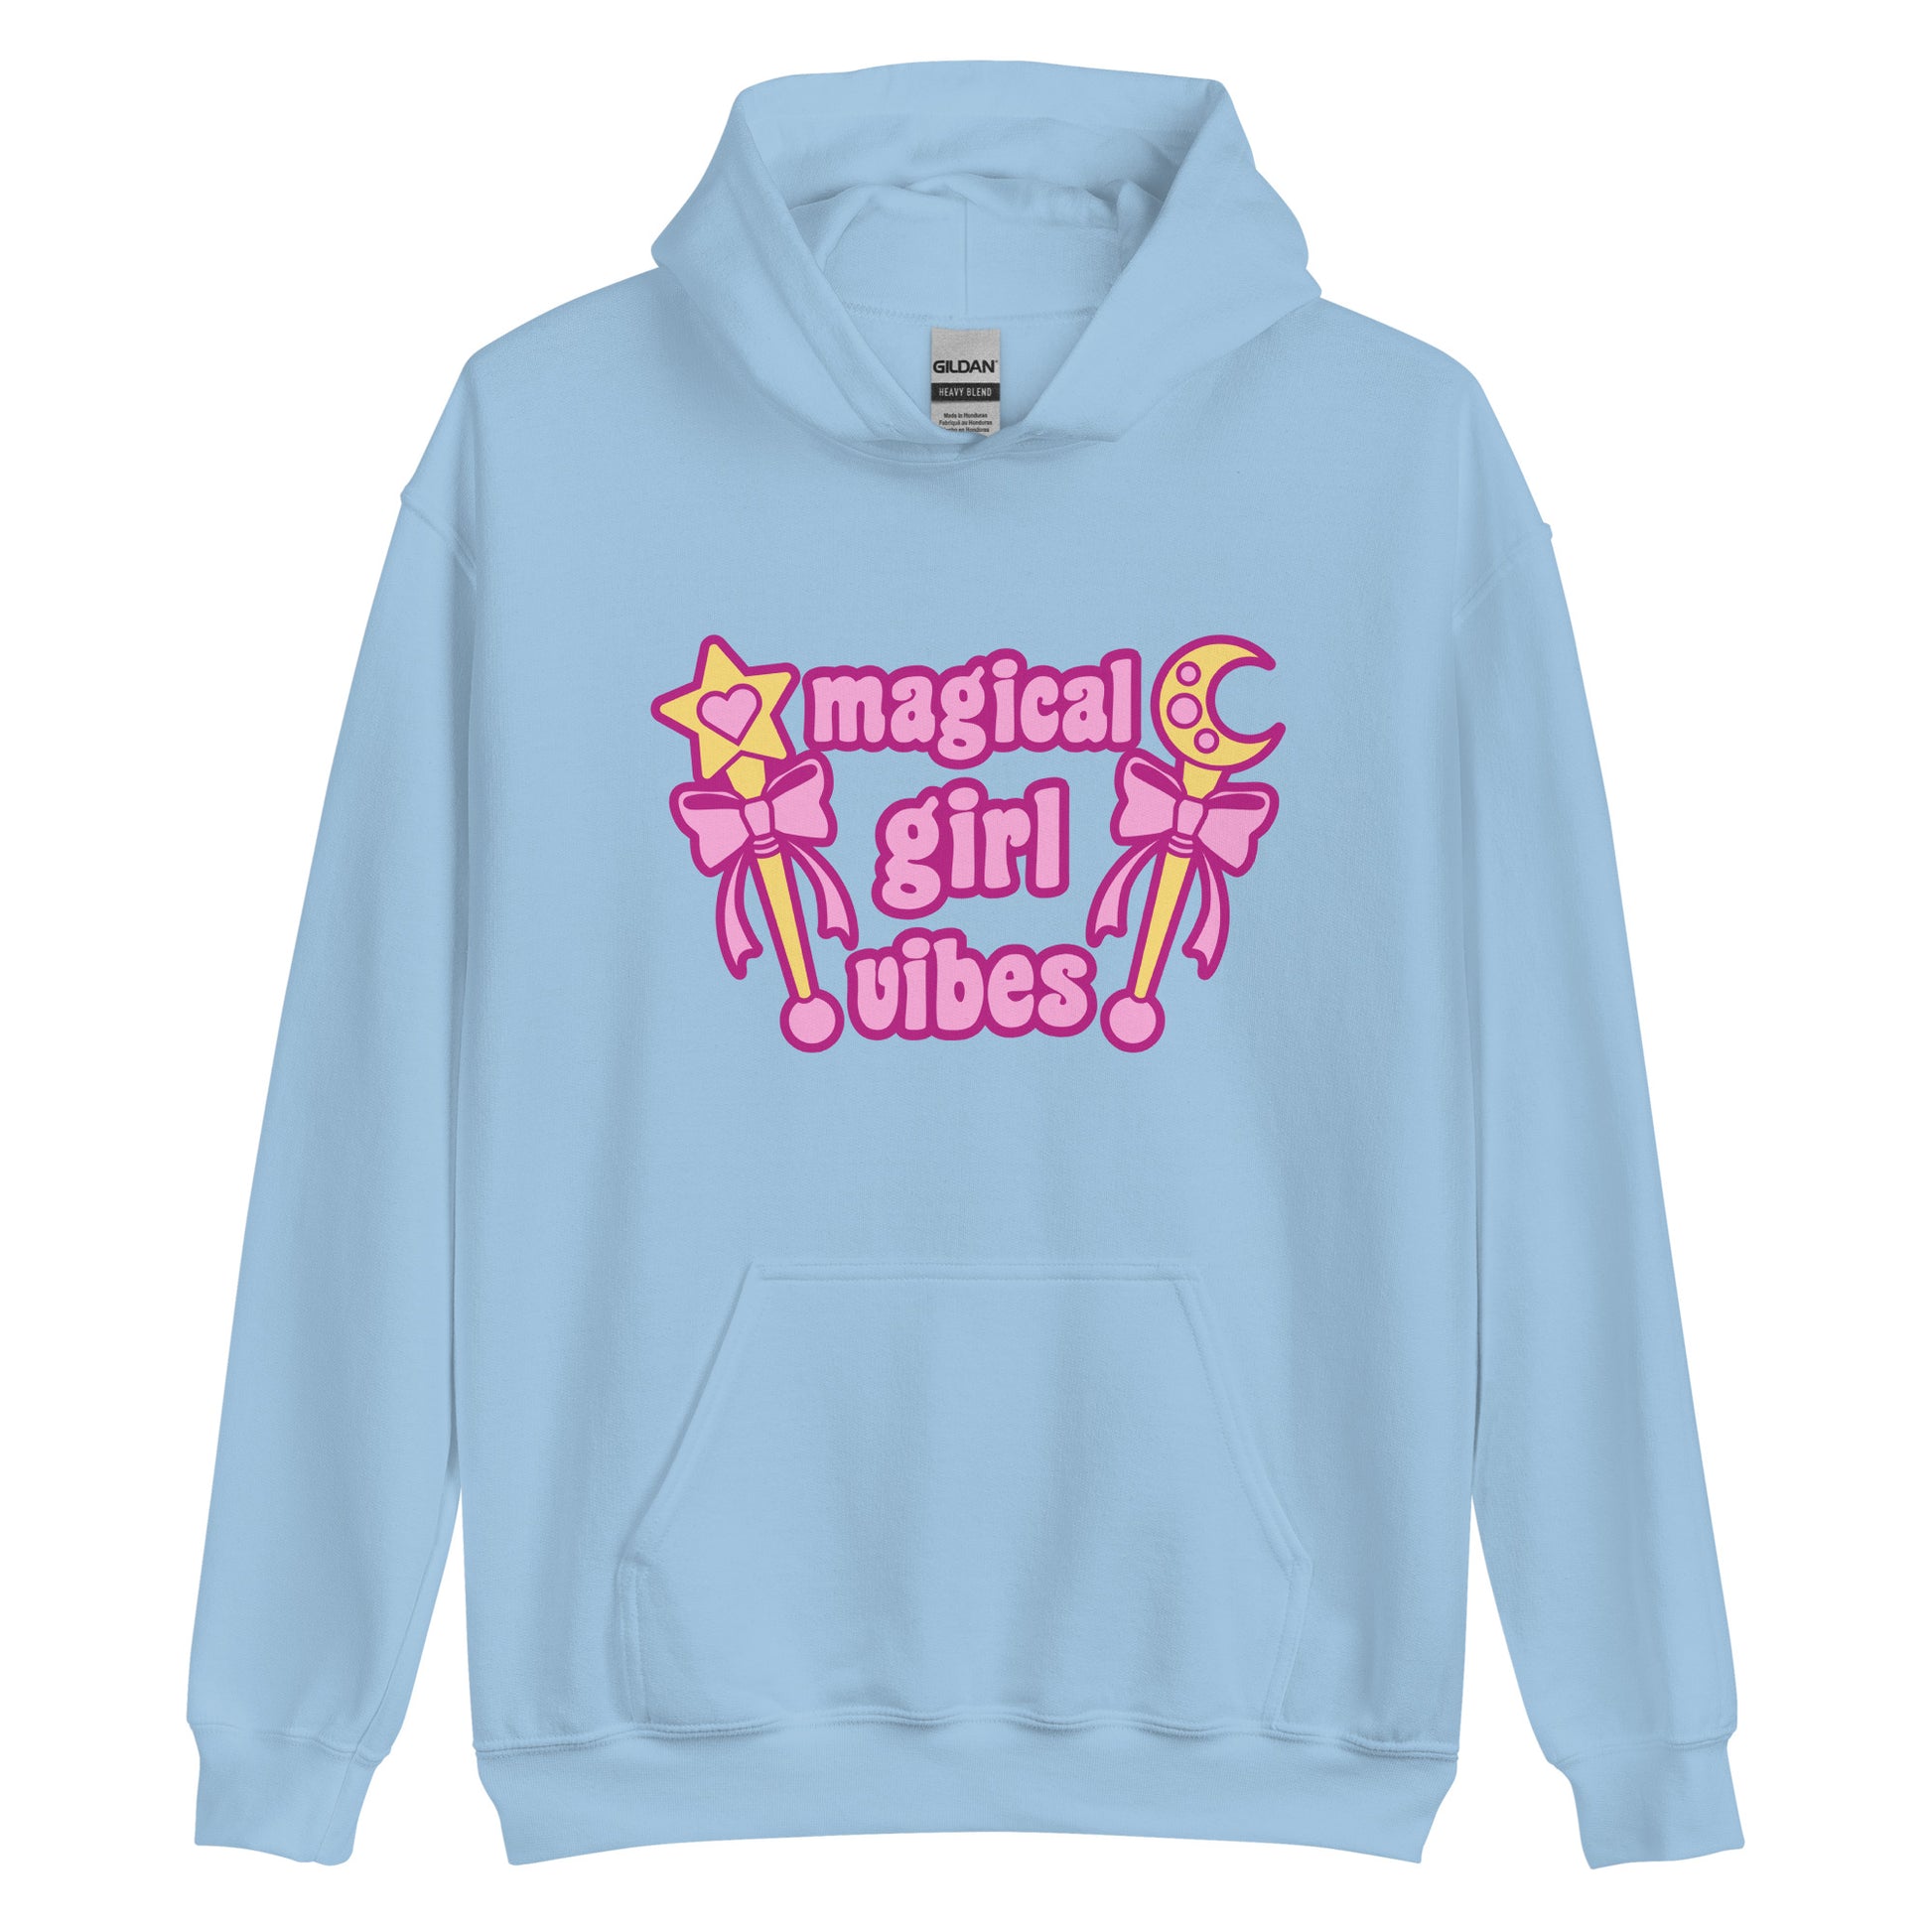 A light blue hooded sweatshirt featuring two gold wands with pink bows and pink text reading "Magical girl vibes"